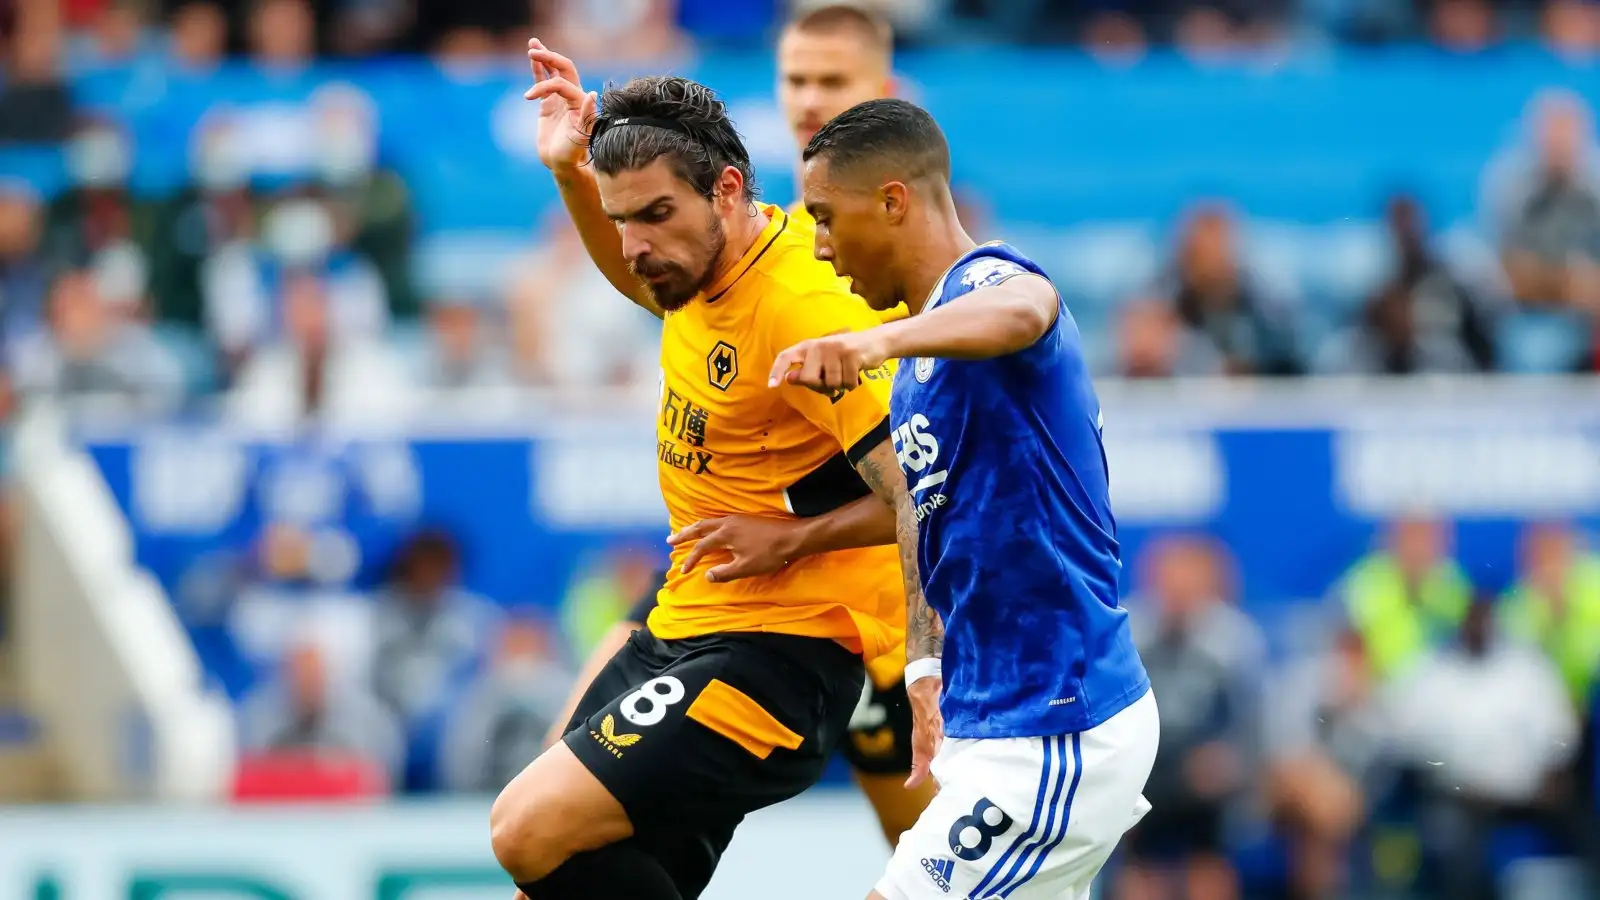 Manchester United should target Ruben Neves and Youri Tielemans